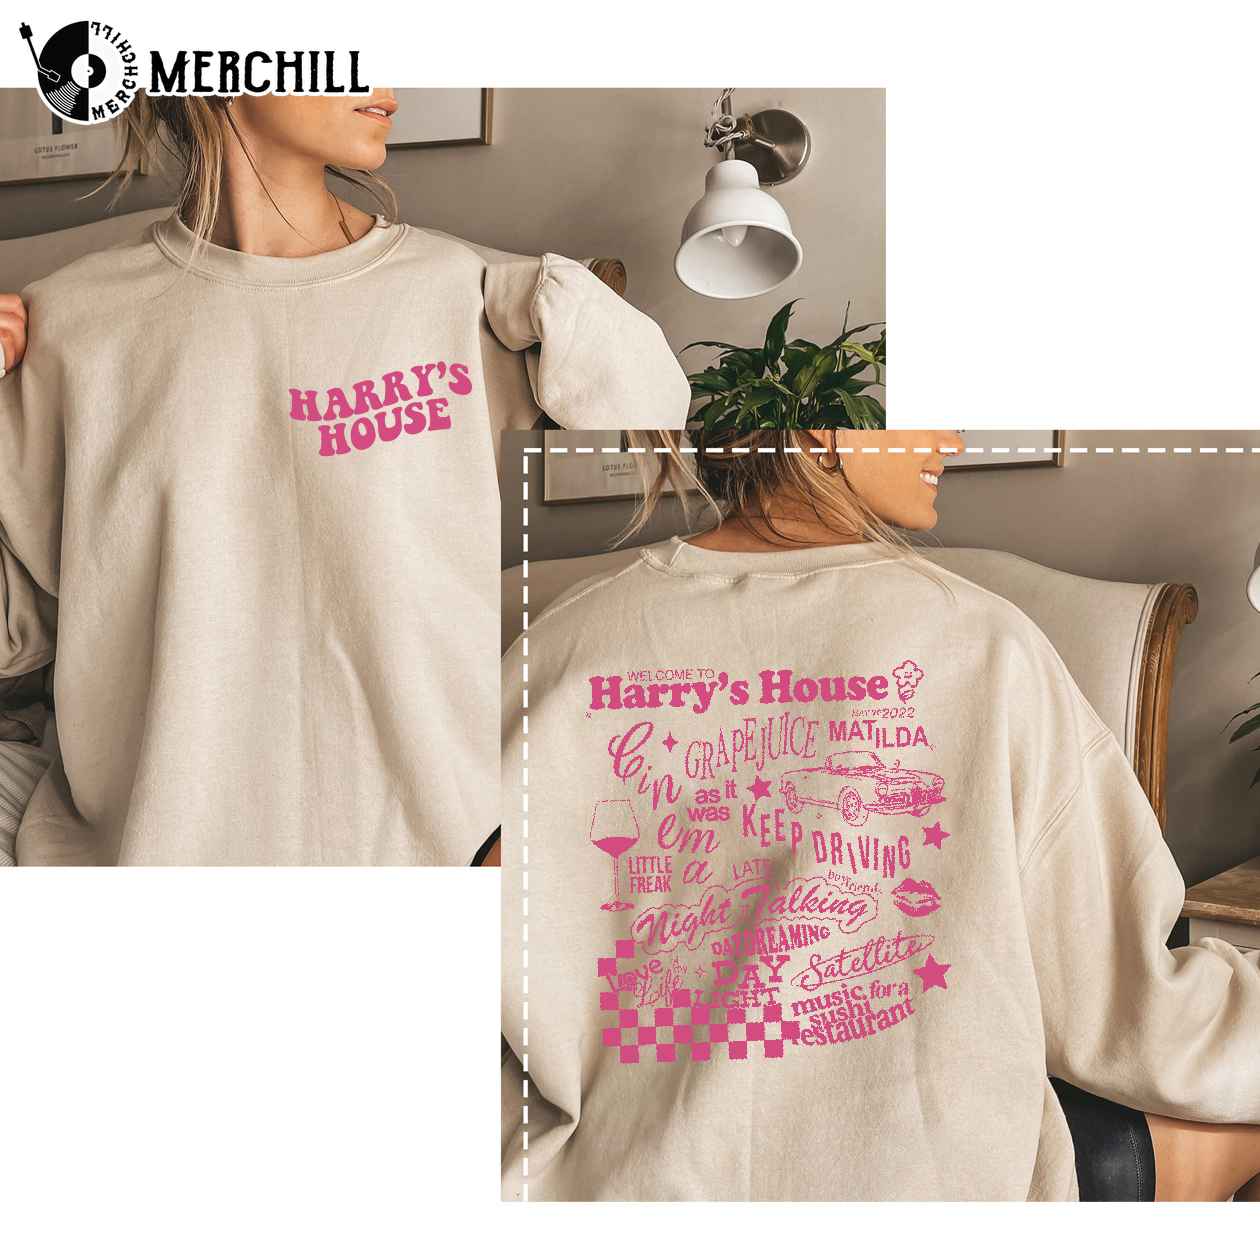 https://images.merchill.com/wp-content/uploads/2022/11/Harrys-House-Harry-Styles-Vintage-Shirt-Harry-Styles-Gifts-for-Her.jpg